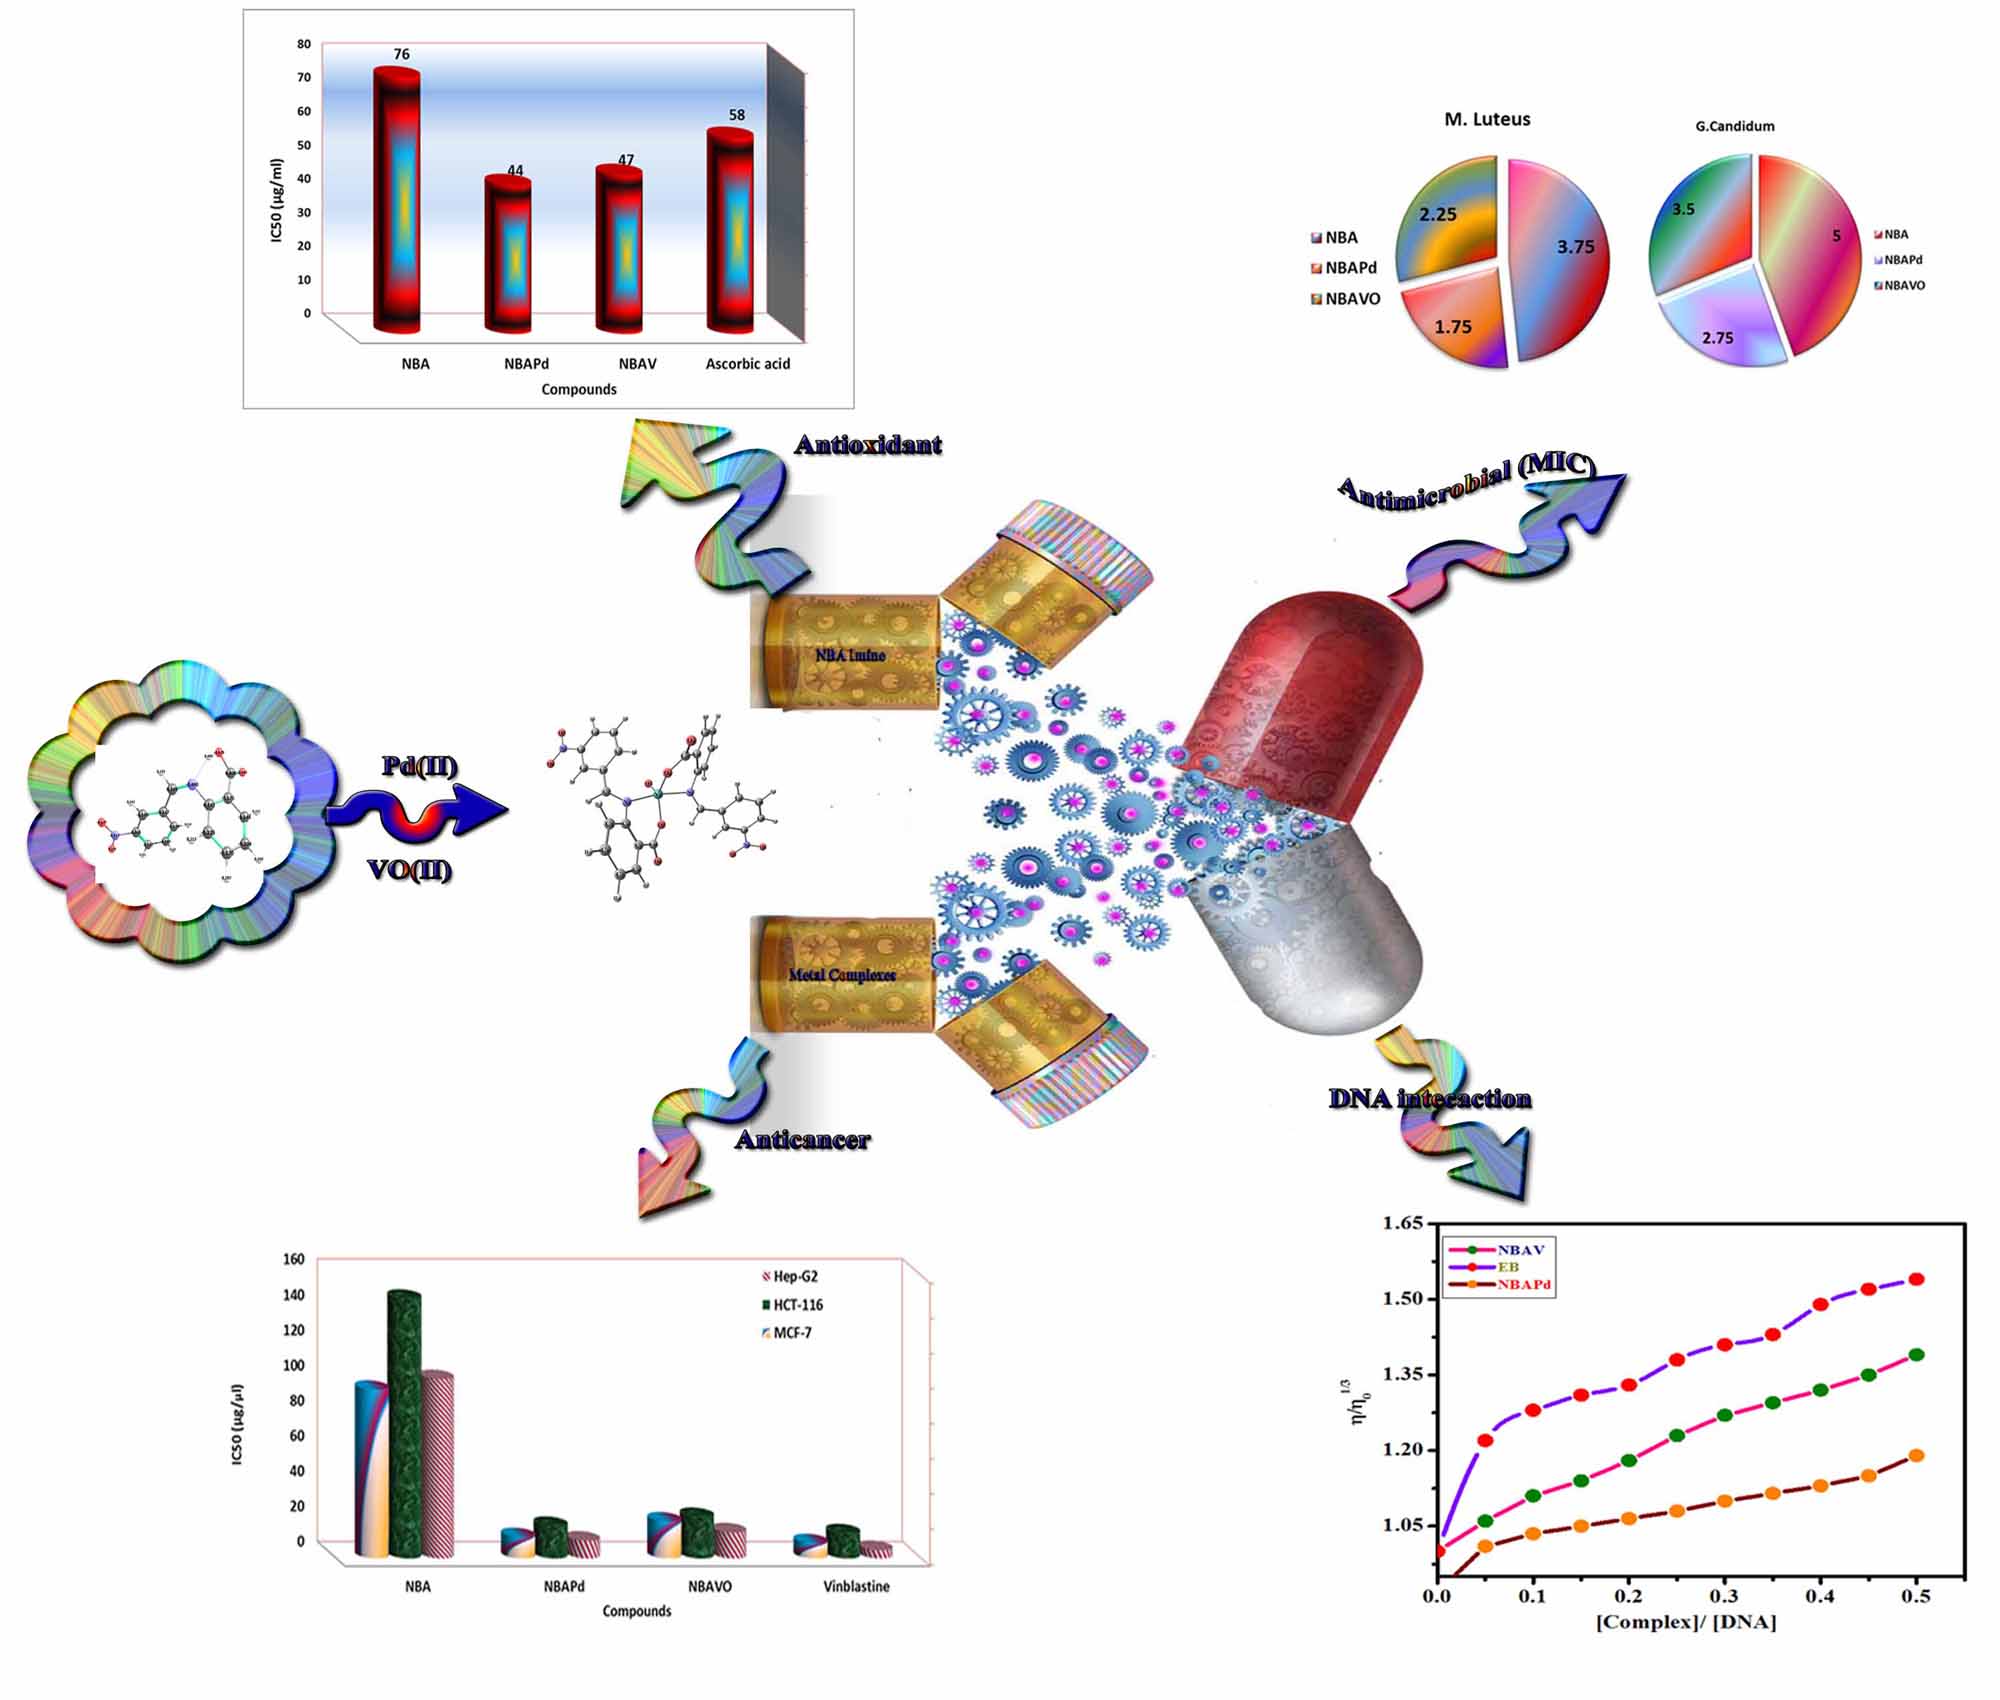 Novel Azomethine Pd(II) and VO(II)  Based Metallo-Pharmaceuticals as Anticancer, Antimicrobial and Antioxidant  agents:  Design, Structural inspection,  DFT investigation and DNA interaction